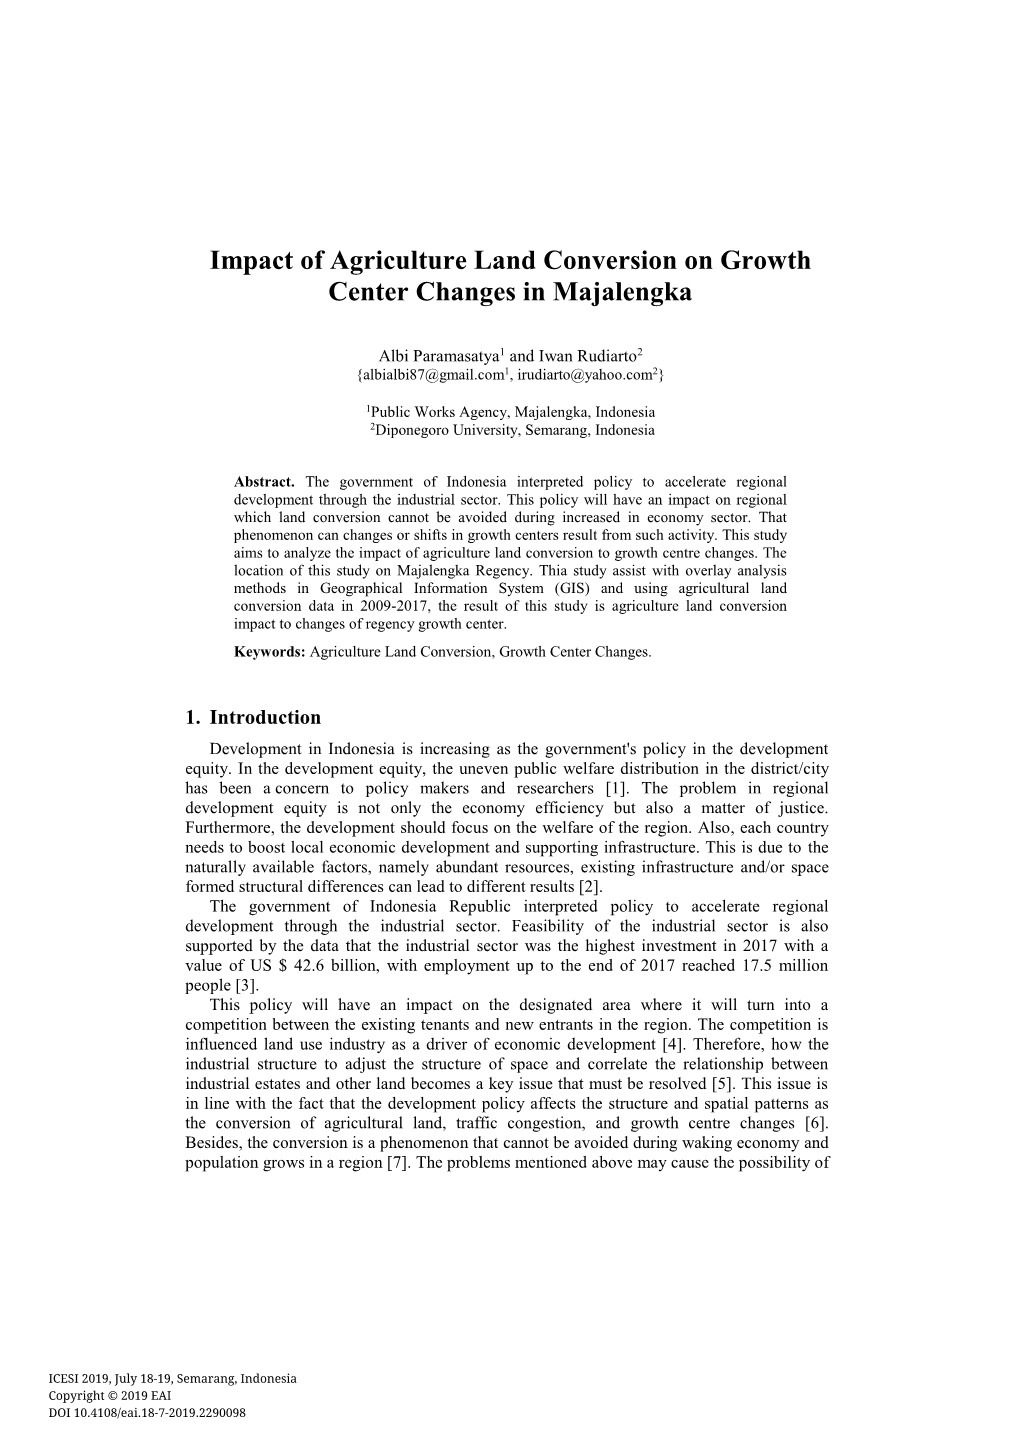 Impact of Agriculture Land Conversion on Growth Center Changes in Majalengka